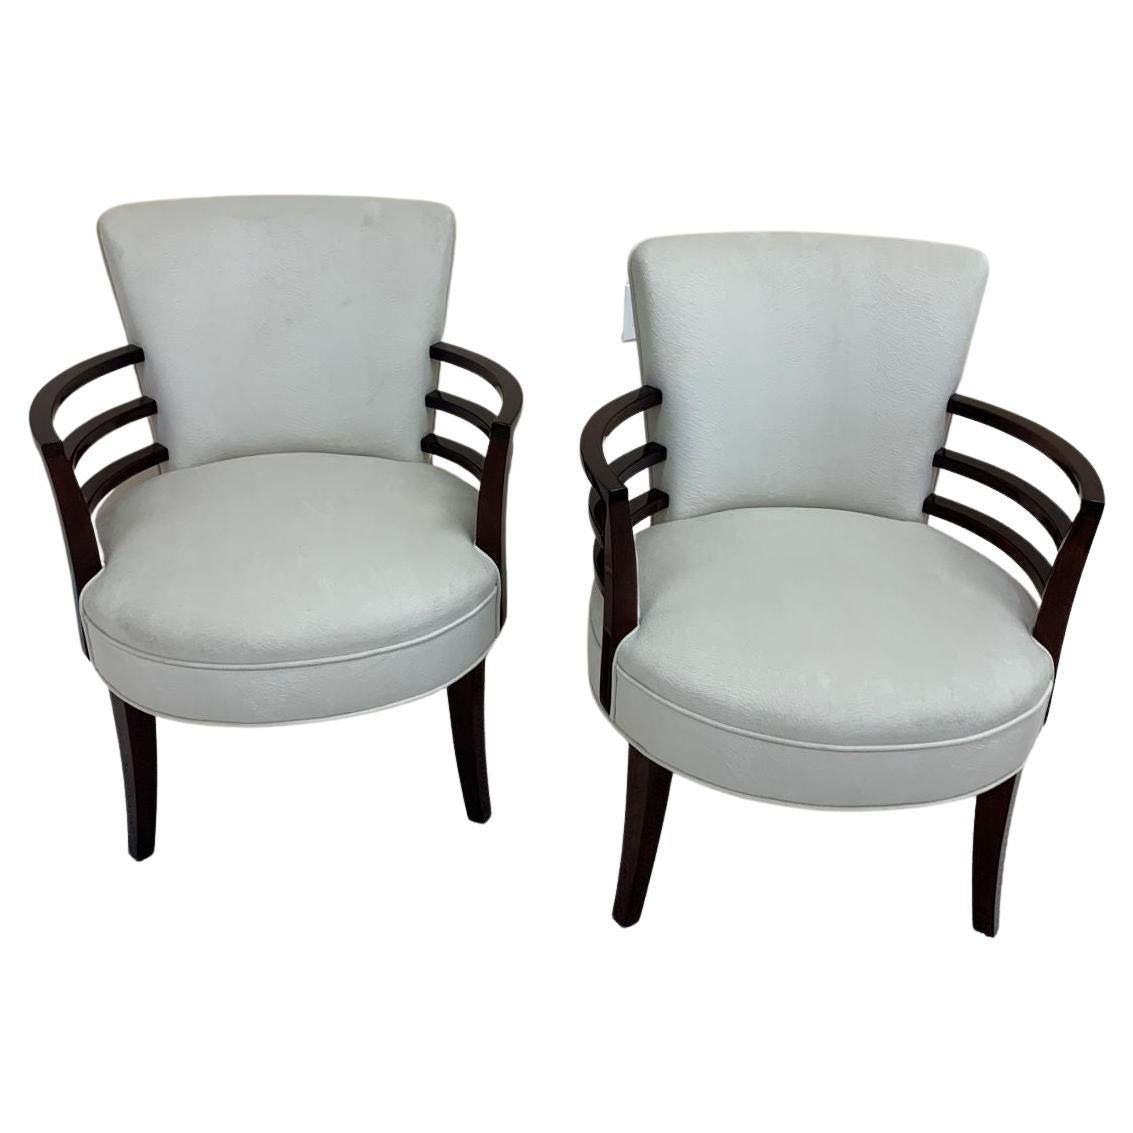 Pair of Art Deco Circular Chairs in the Style of Gilbert Rohde